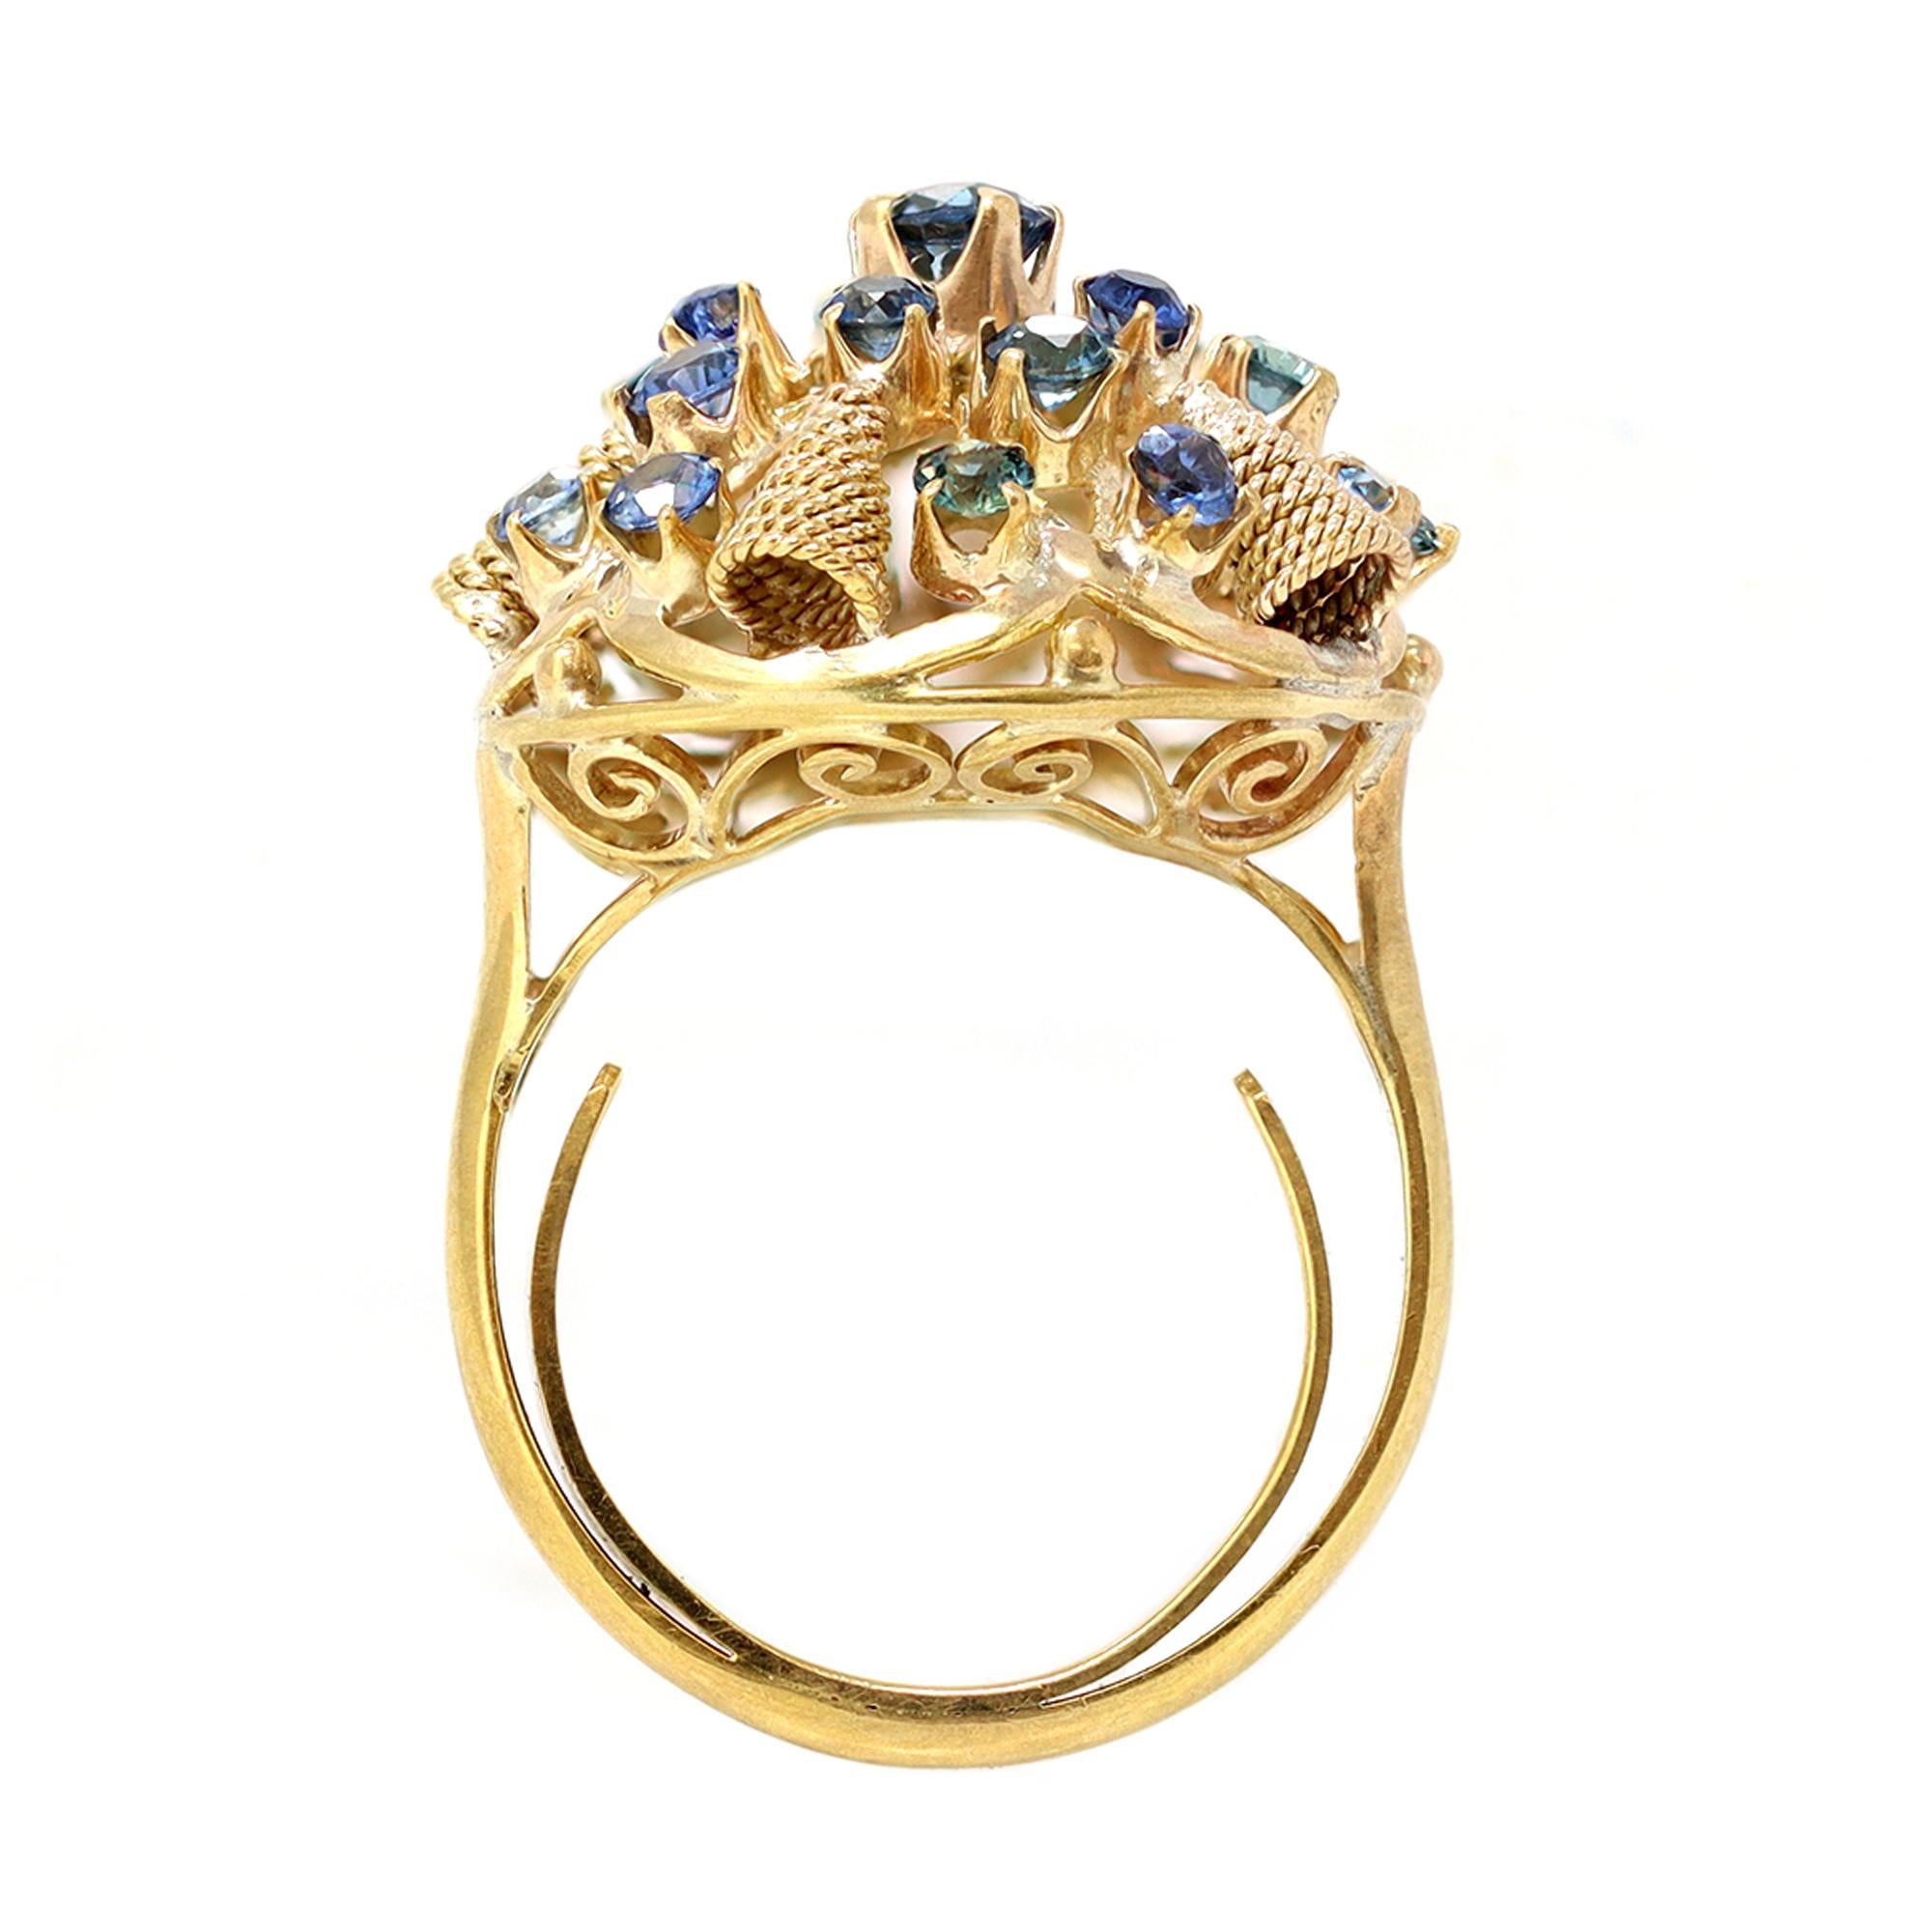 An uncommon vintage cluster sapphire dome ring styled in 14 karat yellow gold. The estimated weight of the faceted round sapphires is 2.20 carats with an even light blue color. The gross weight is 5.4 grams. It fits a size 5¼.